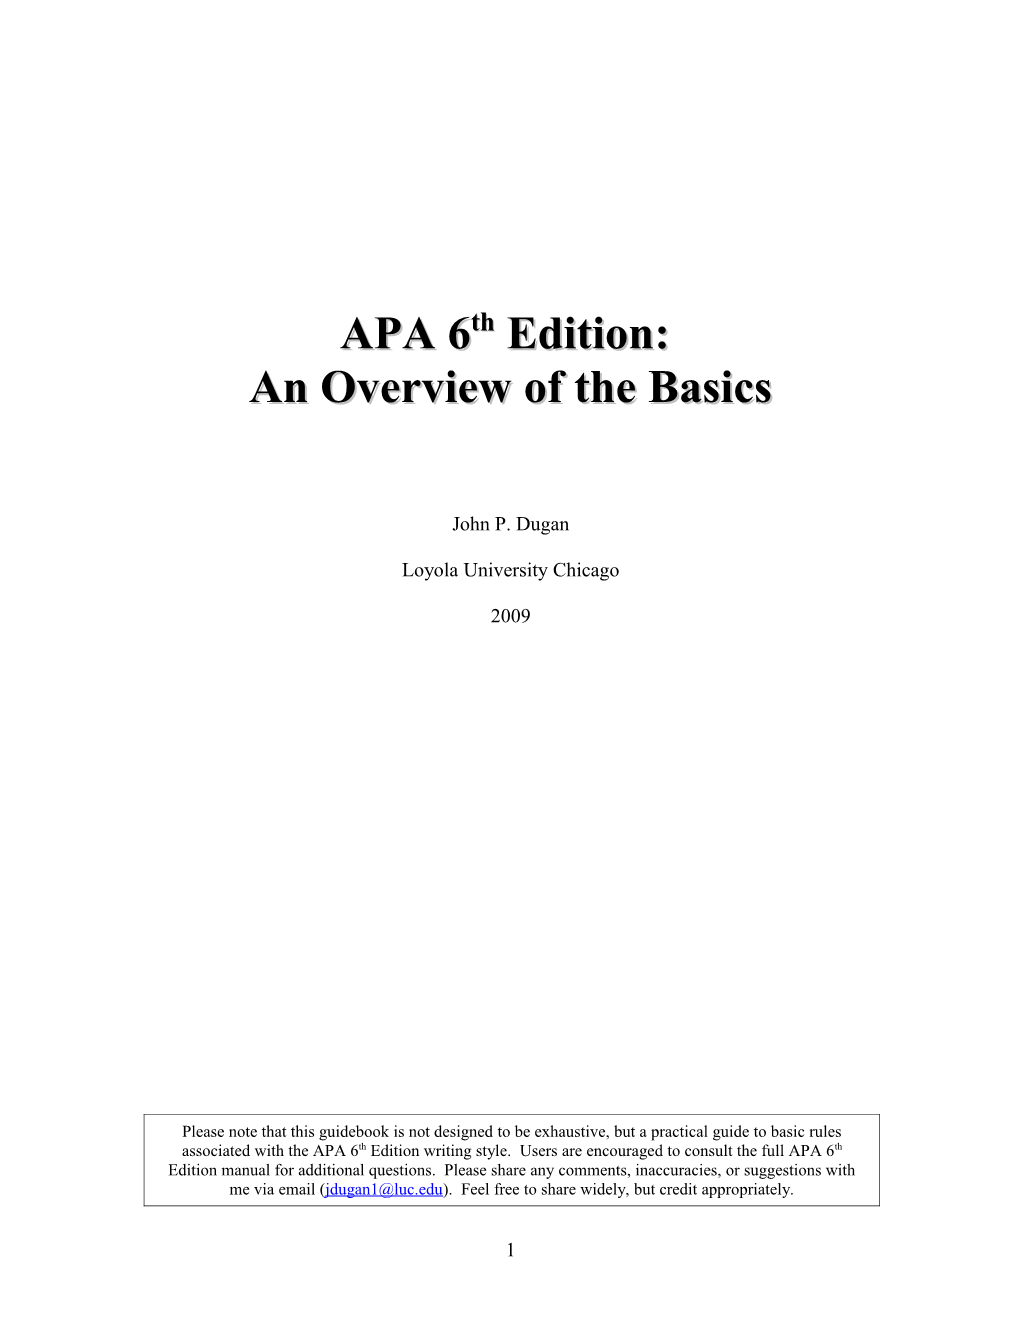 APA 5Th Edition: an Overview of the Basics